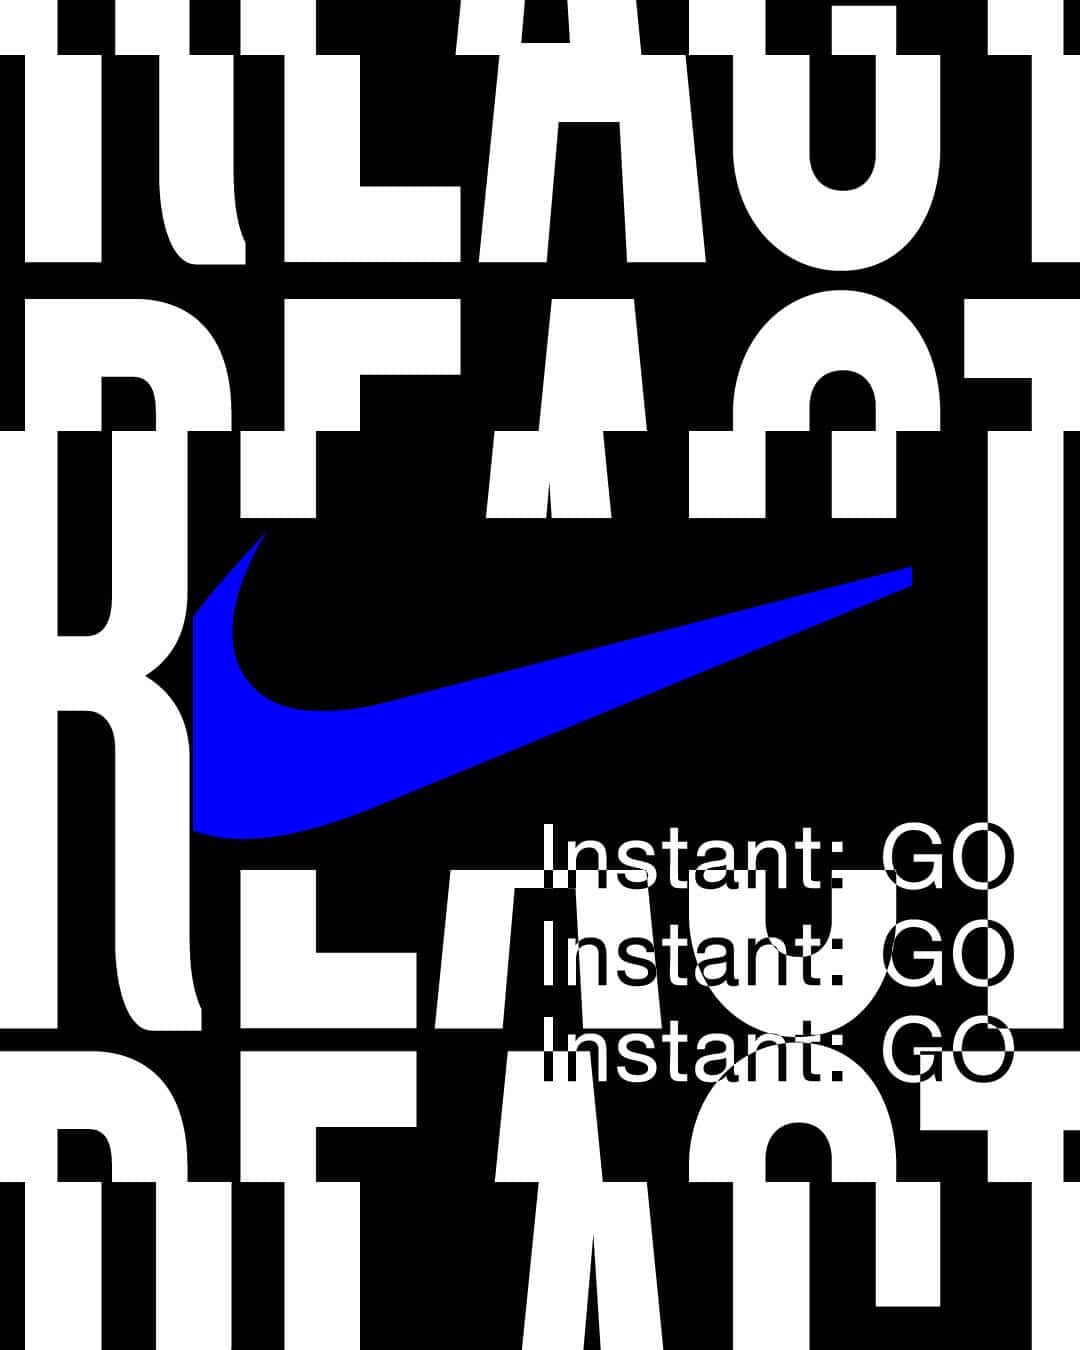 Tran La x Conscious Minds – Nike React IG Typographic Poster Campaign 2 (4)